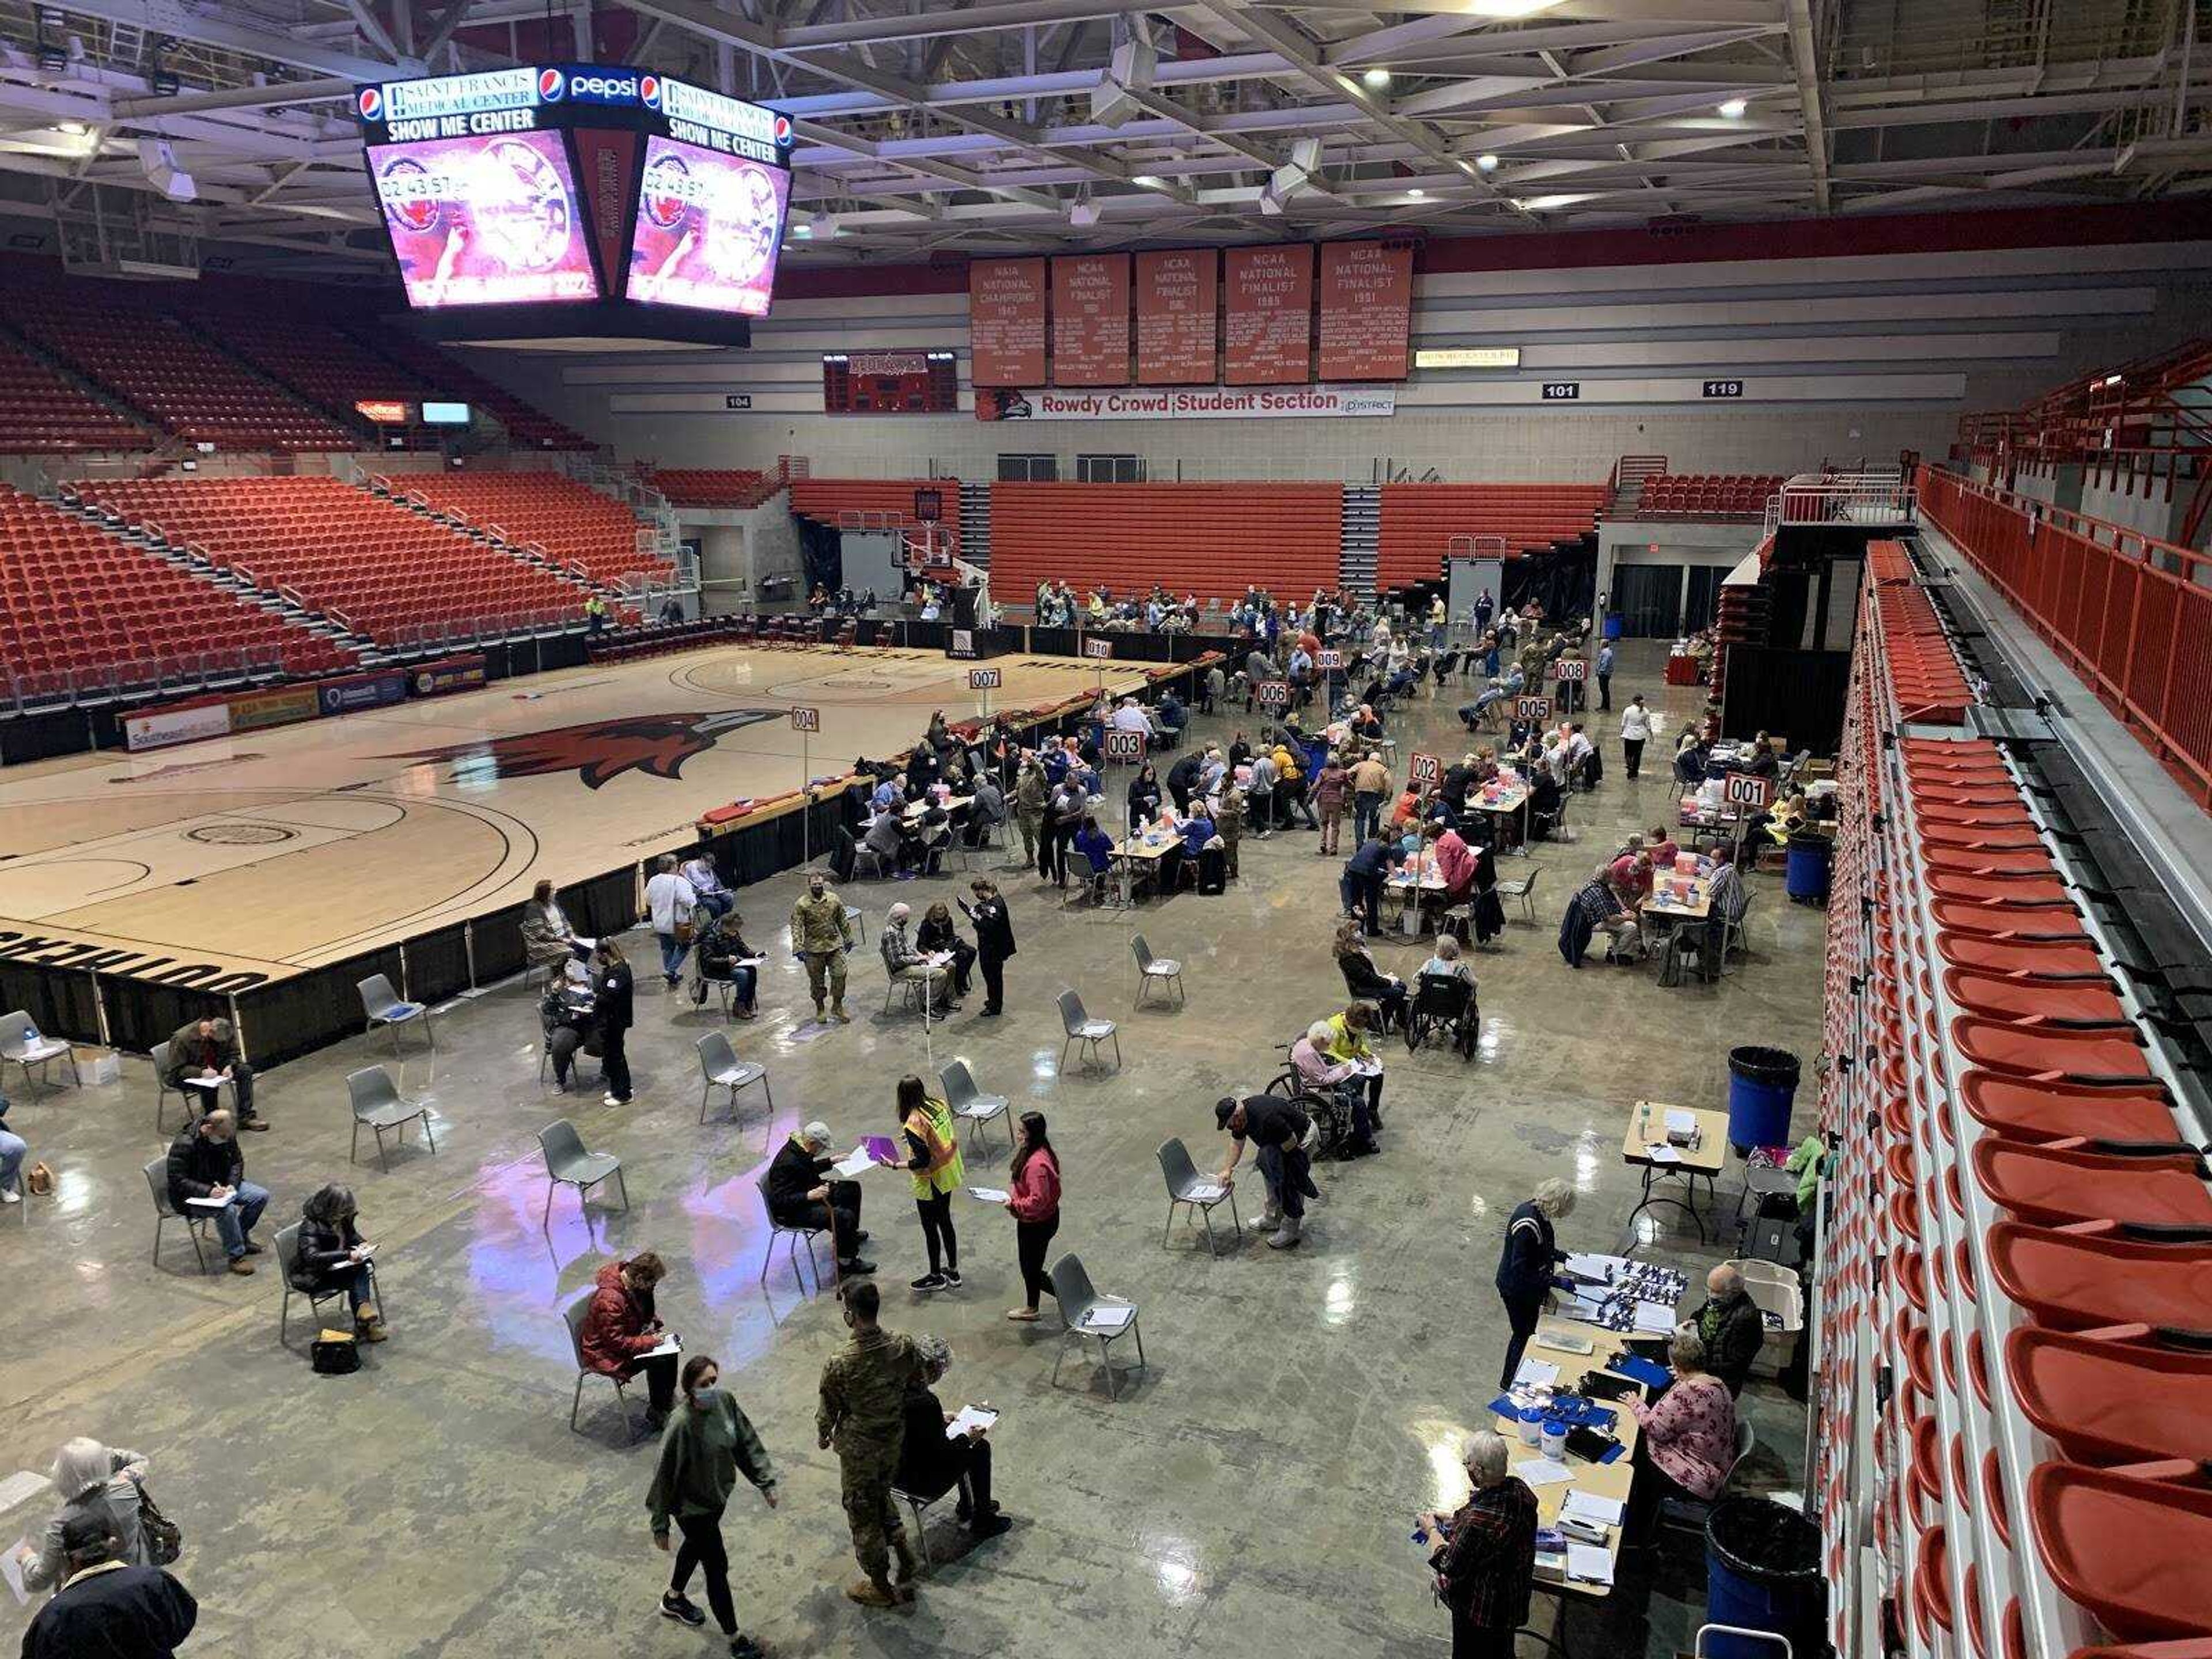 The vaccination floor at the Show Me Center during the mass vaccination clinic on Jan. 29.